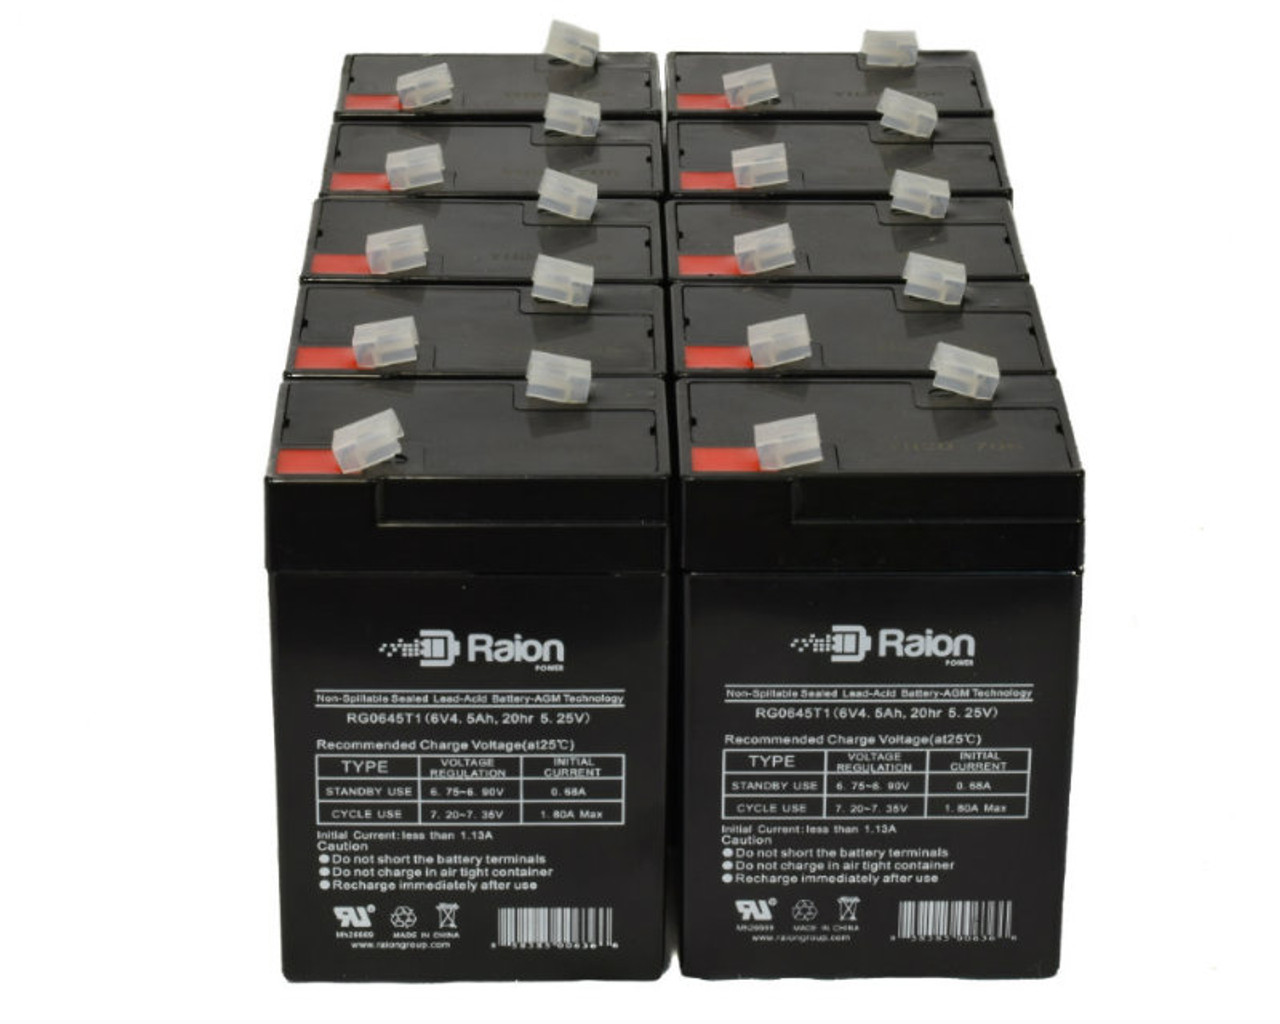 Raion Power 6V 4.5Ah Replacement Emergency Light Battery for Dyna-Ray 4.5 - 10 Pack